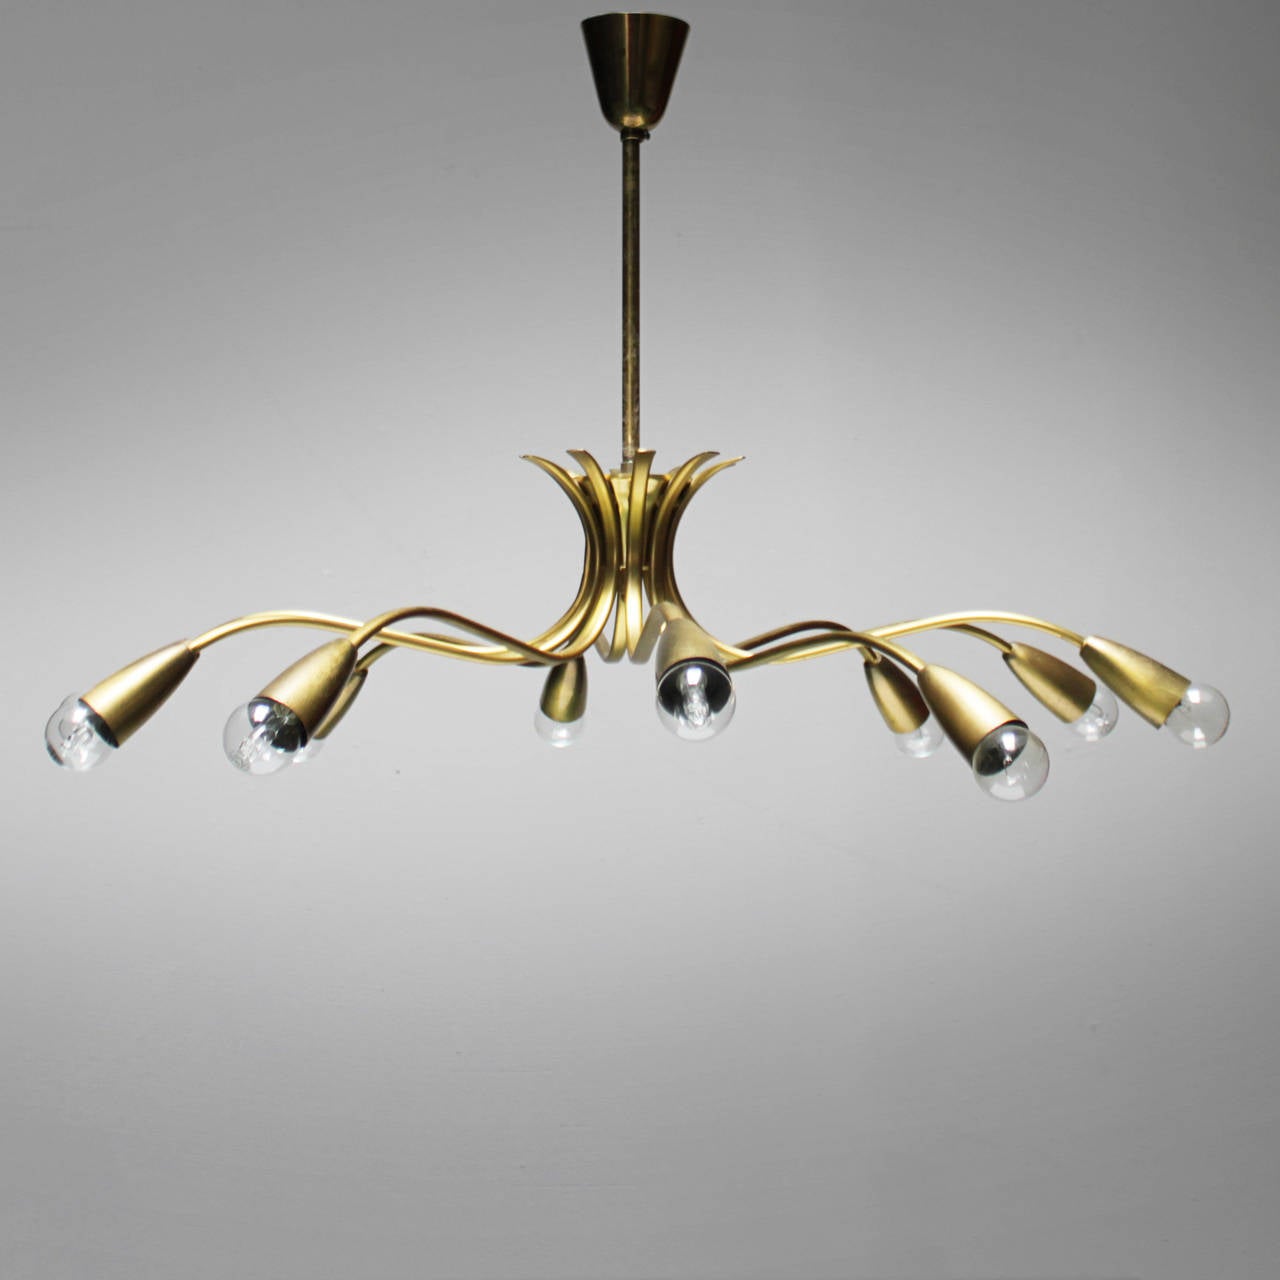 Highly decorative large 10 light fixture in the style of Guglielmo Ulrich. Most likely of Italian origin.